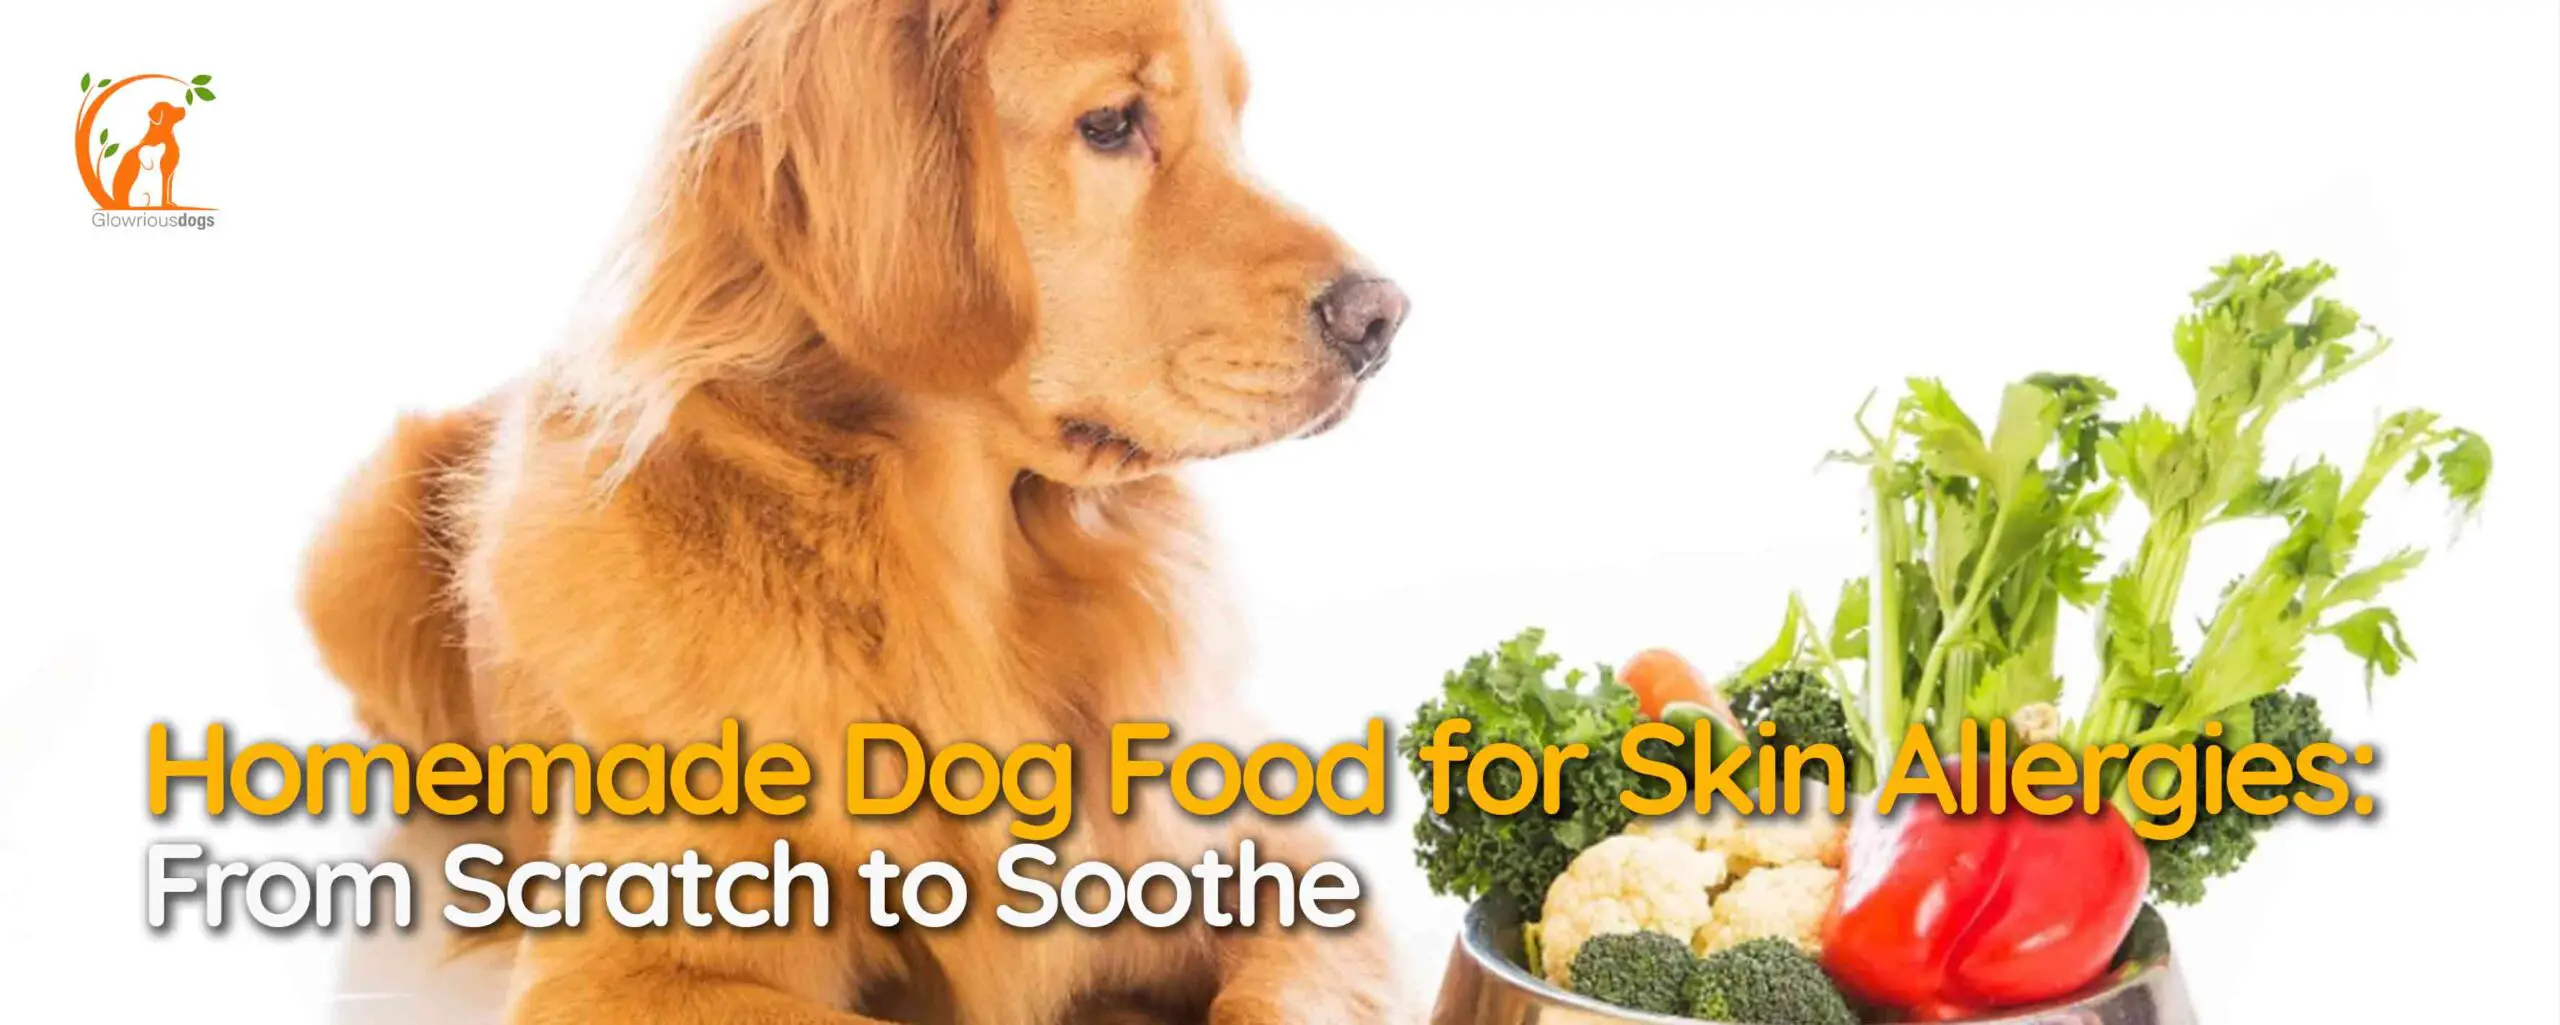 Homemade Dog Food for Skin Allergies: From Scratch to Soothe